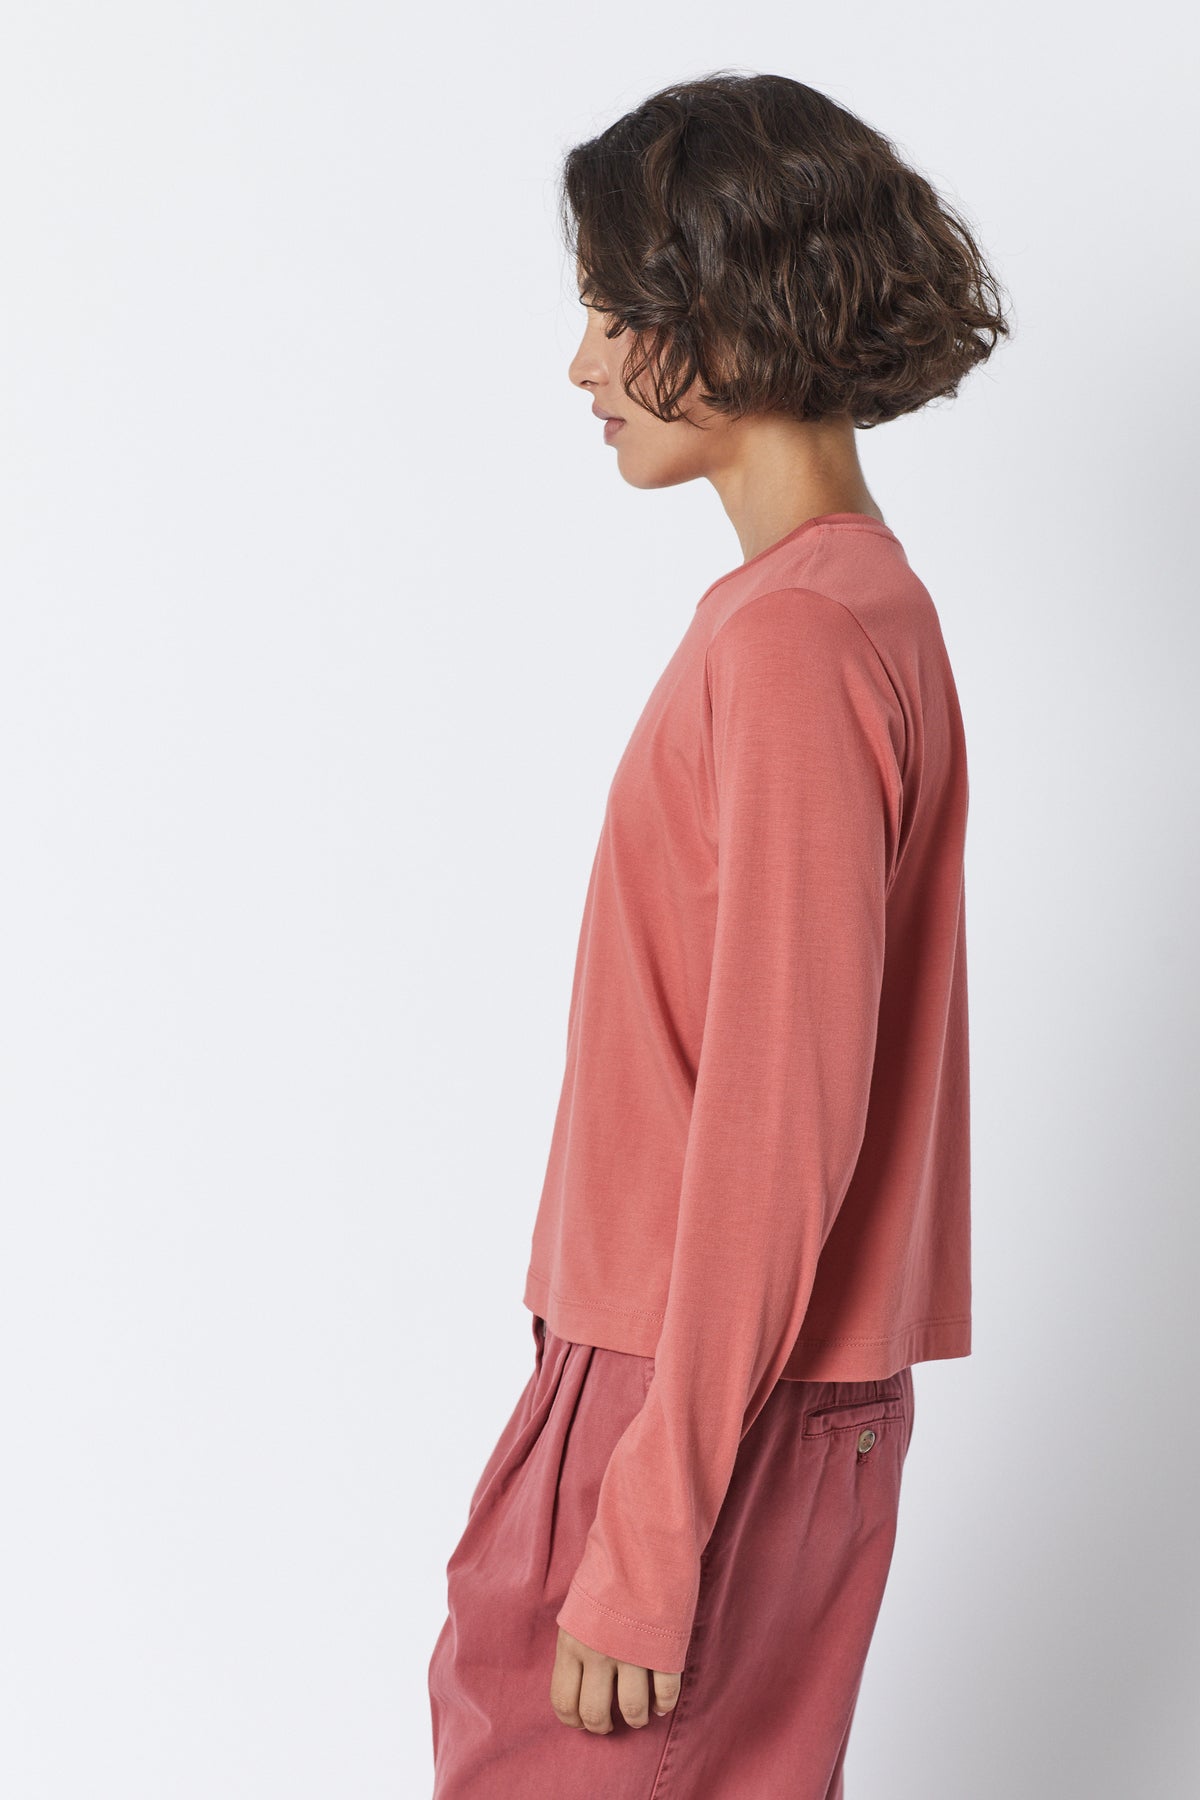   The model is wearing a Velvet by Jenny Graham soft rib knit, pink long-sleeved PACIFICA TEE top and pants. 